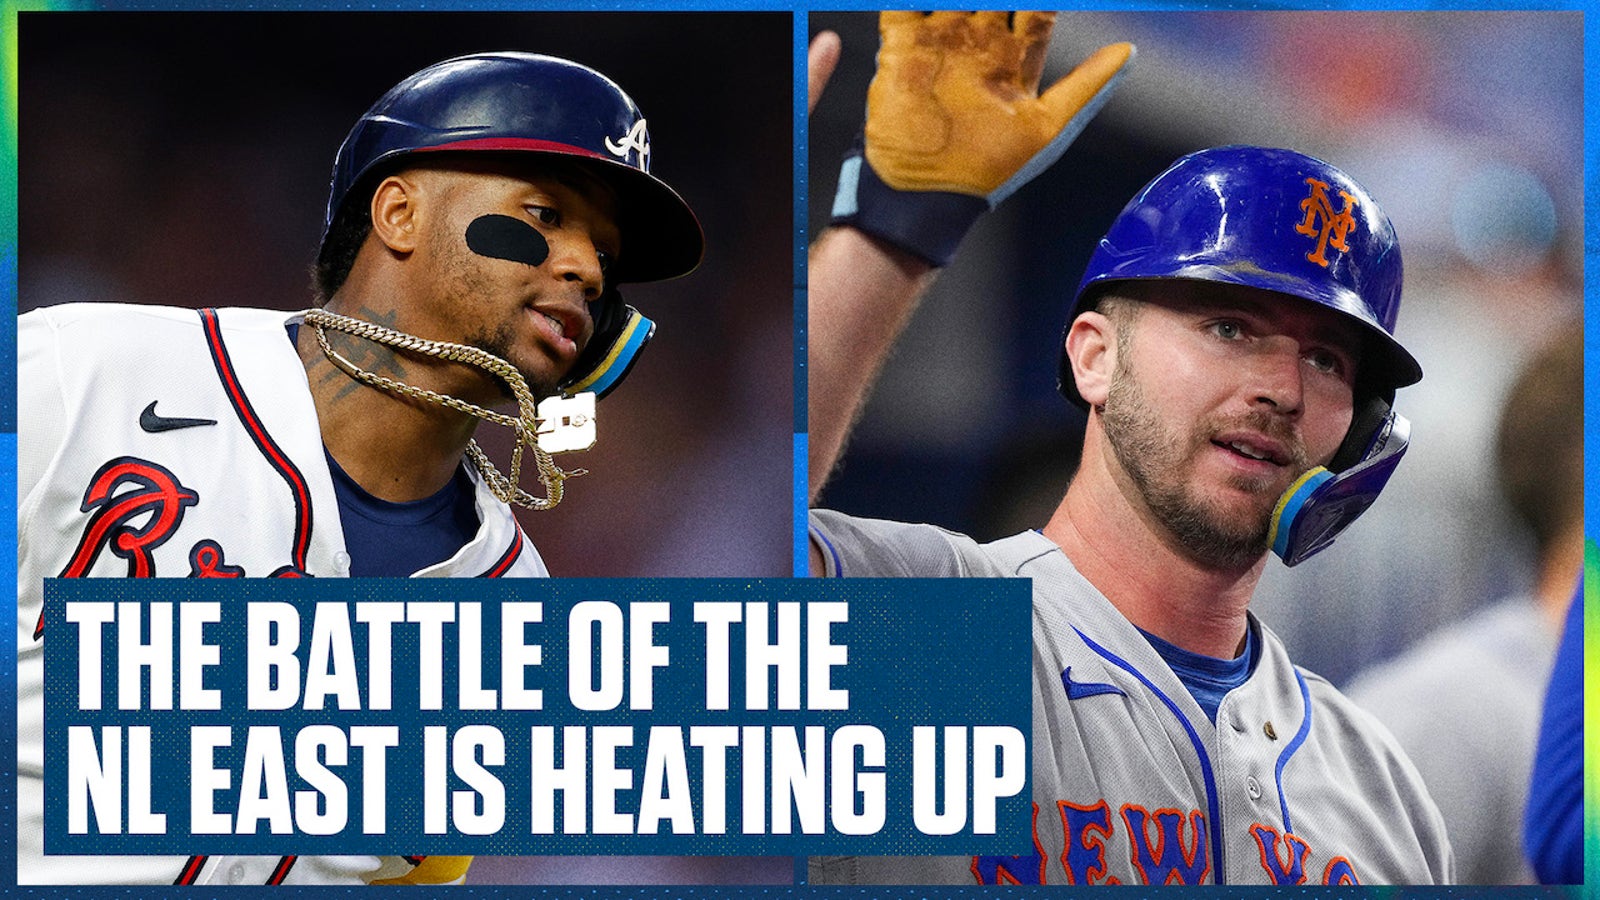 Battle for the NL East crown heats up